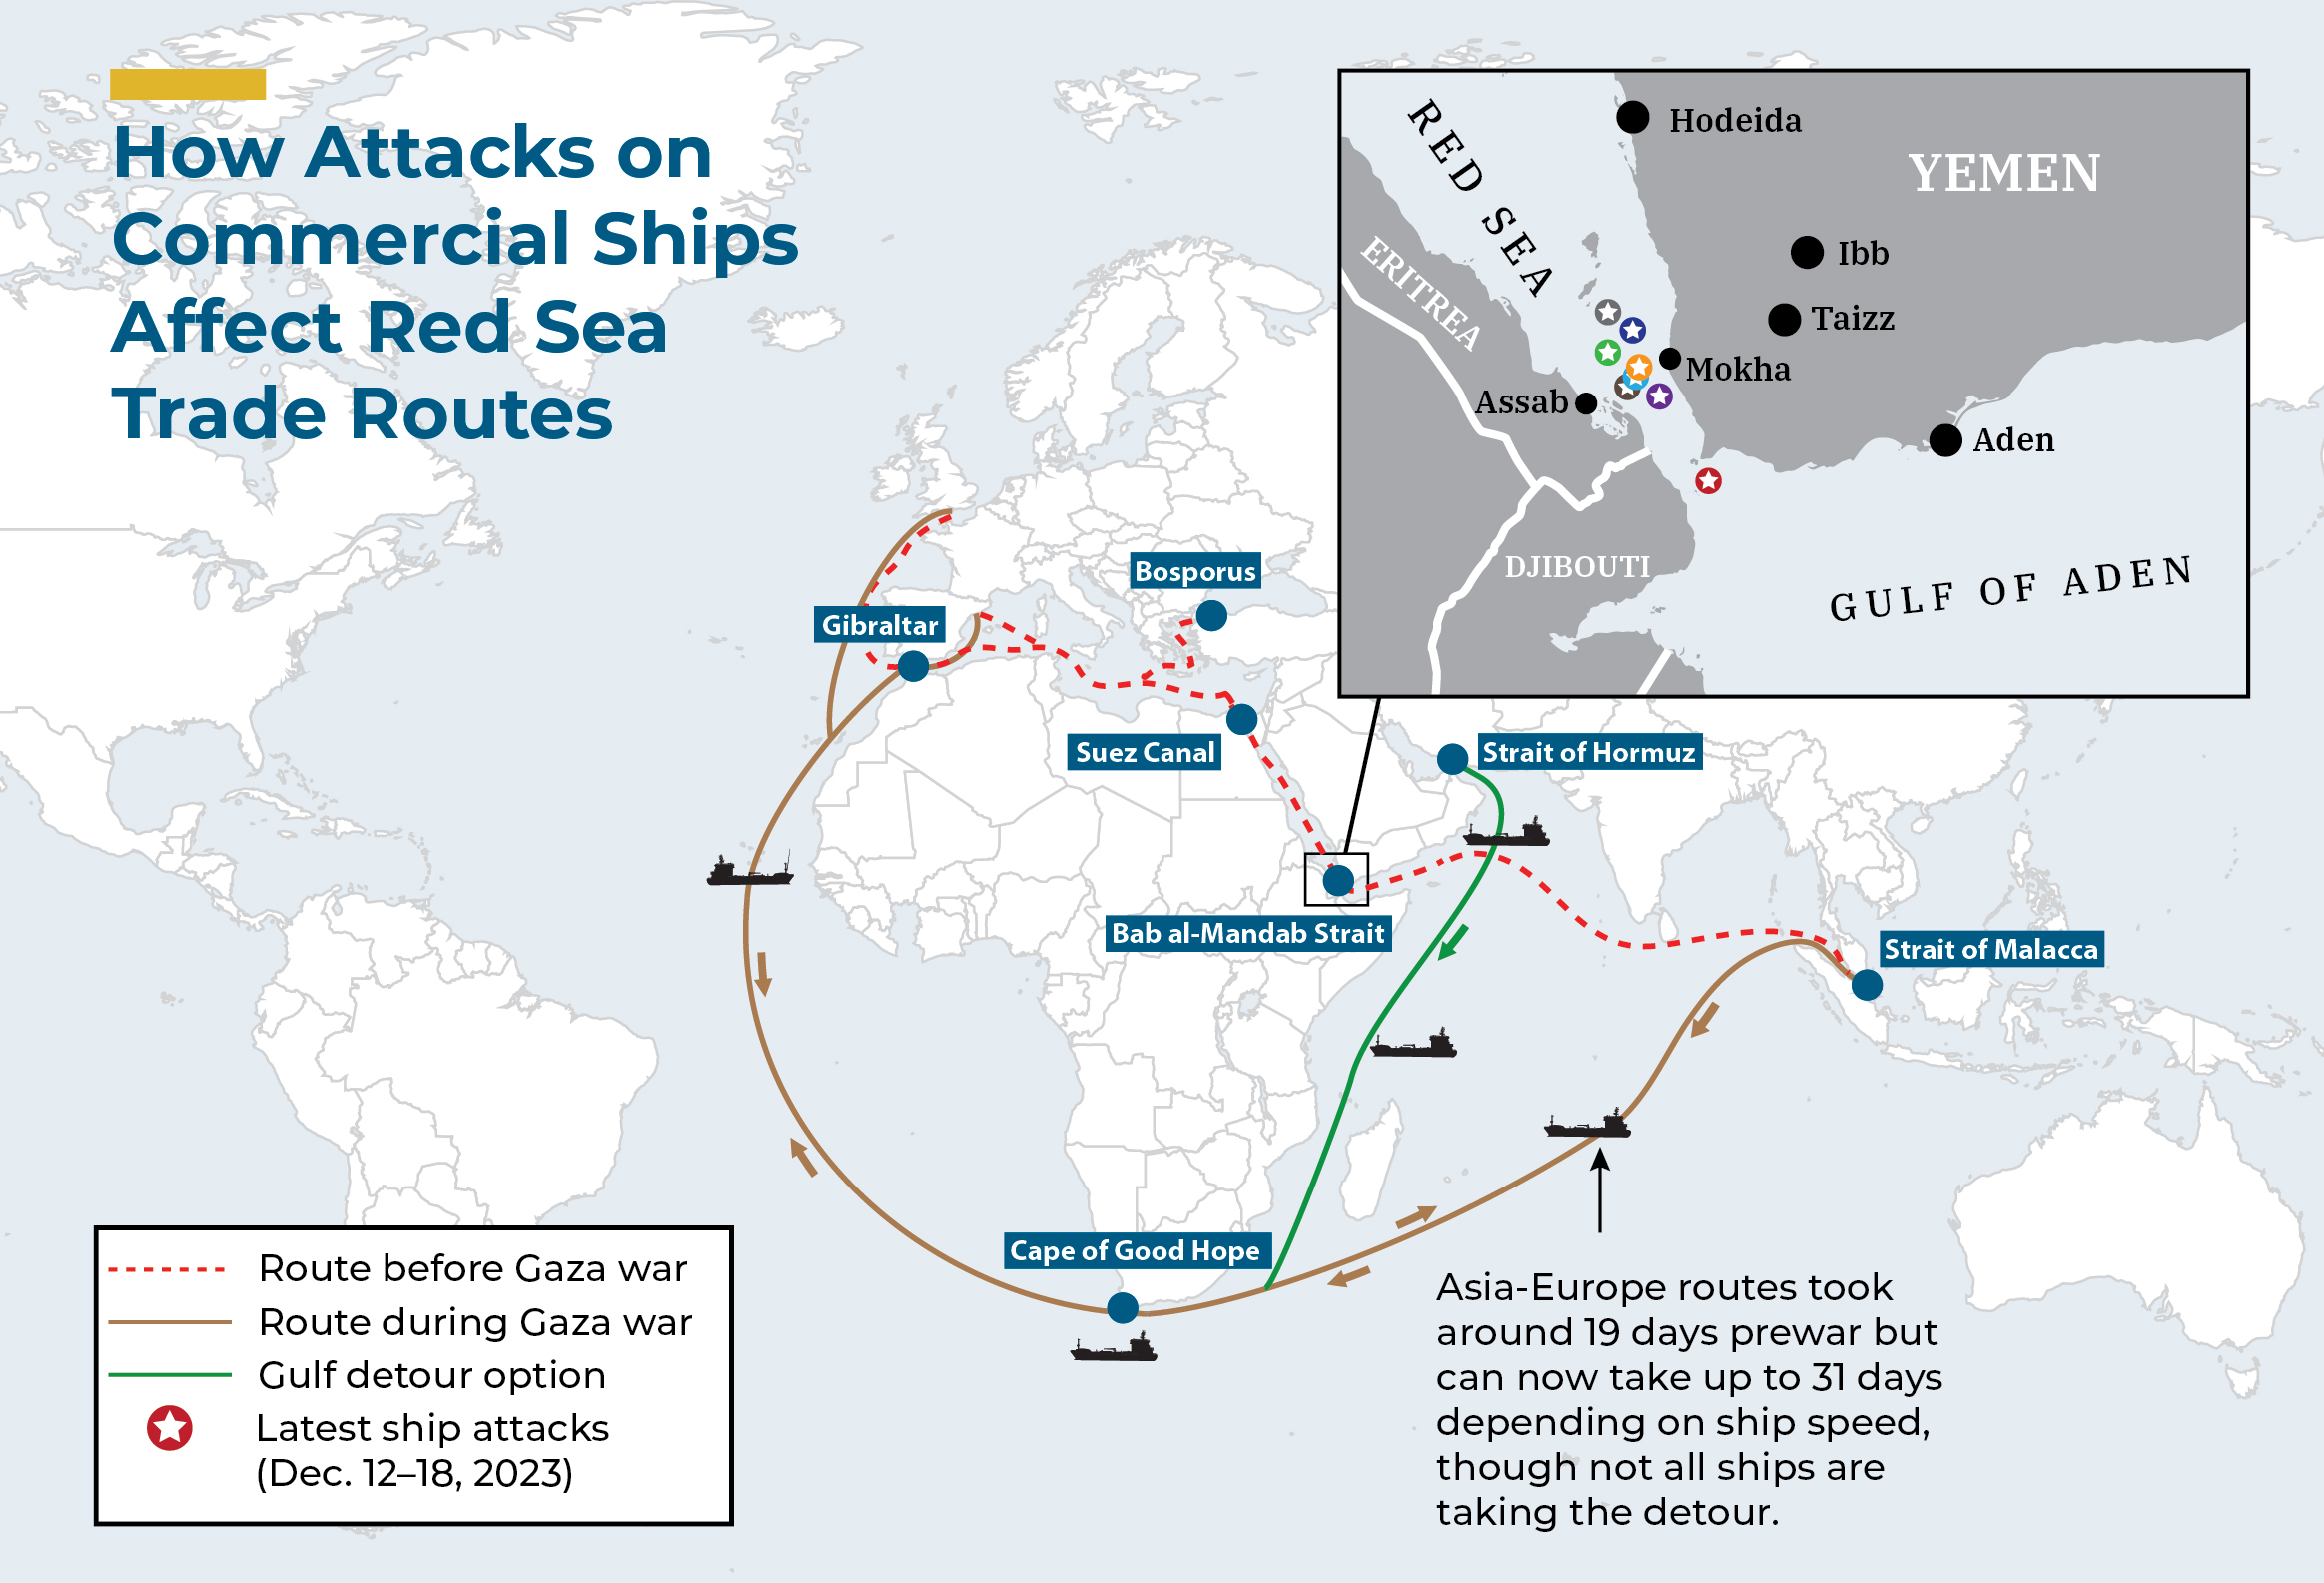 impact on shipping transit time due to the conflict in the red sea